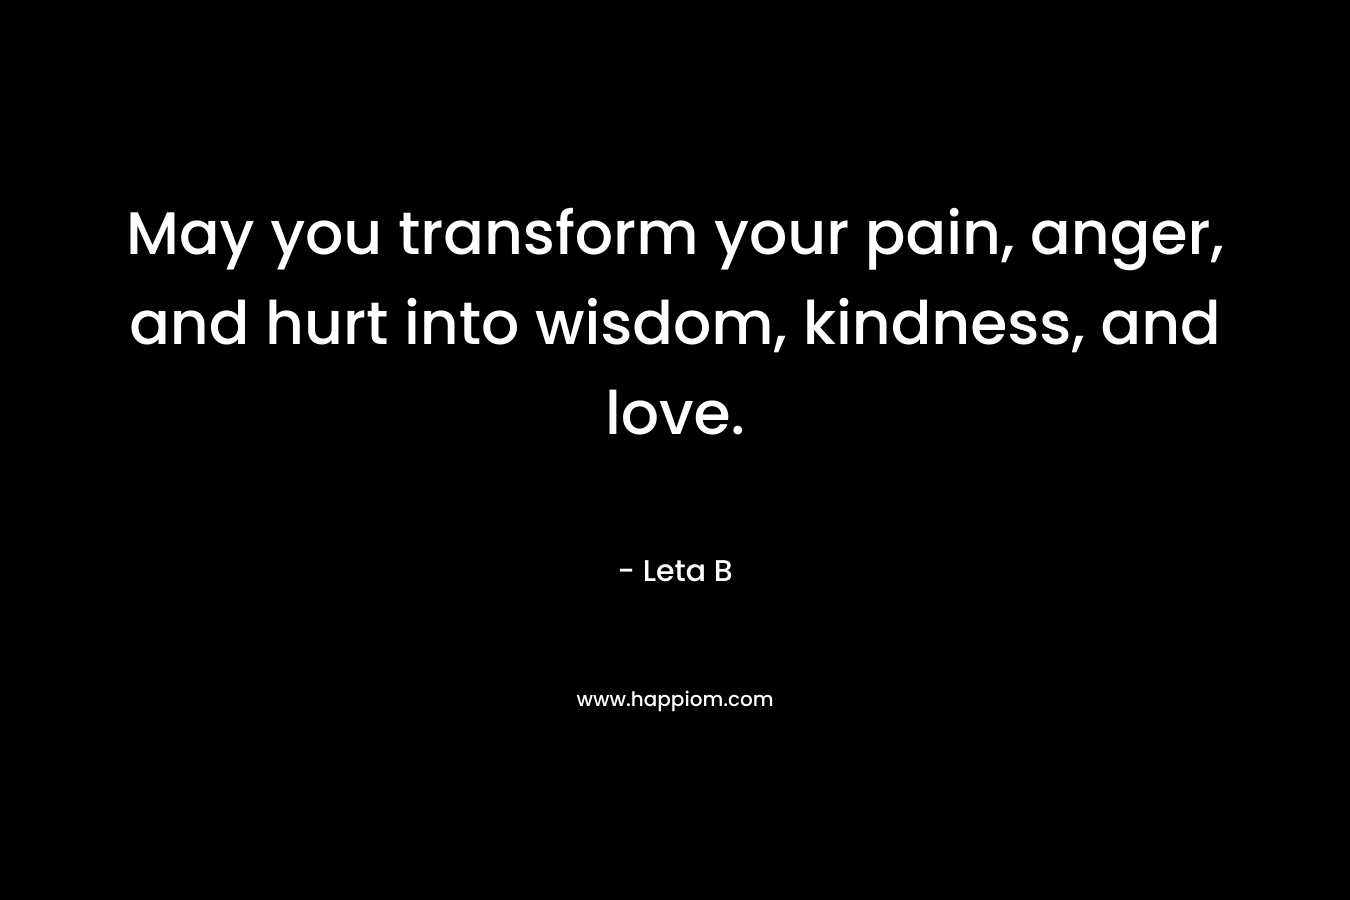 May you transform your pain, anger, and hurt into wisdom, kindness, and love.